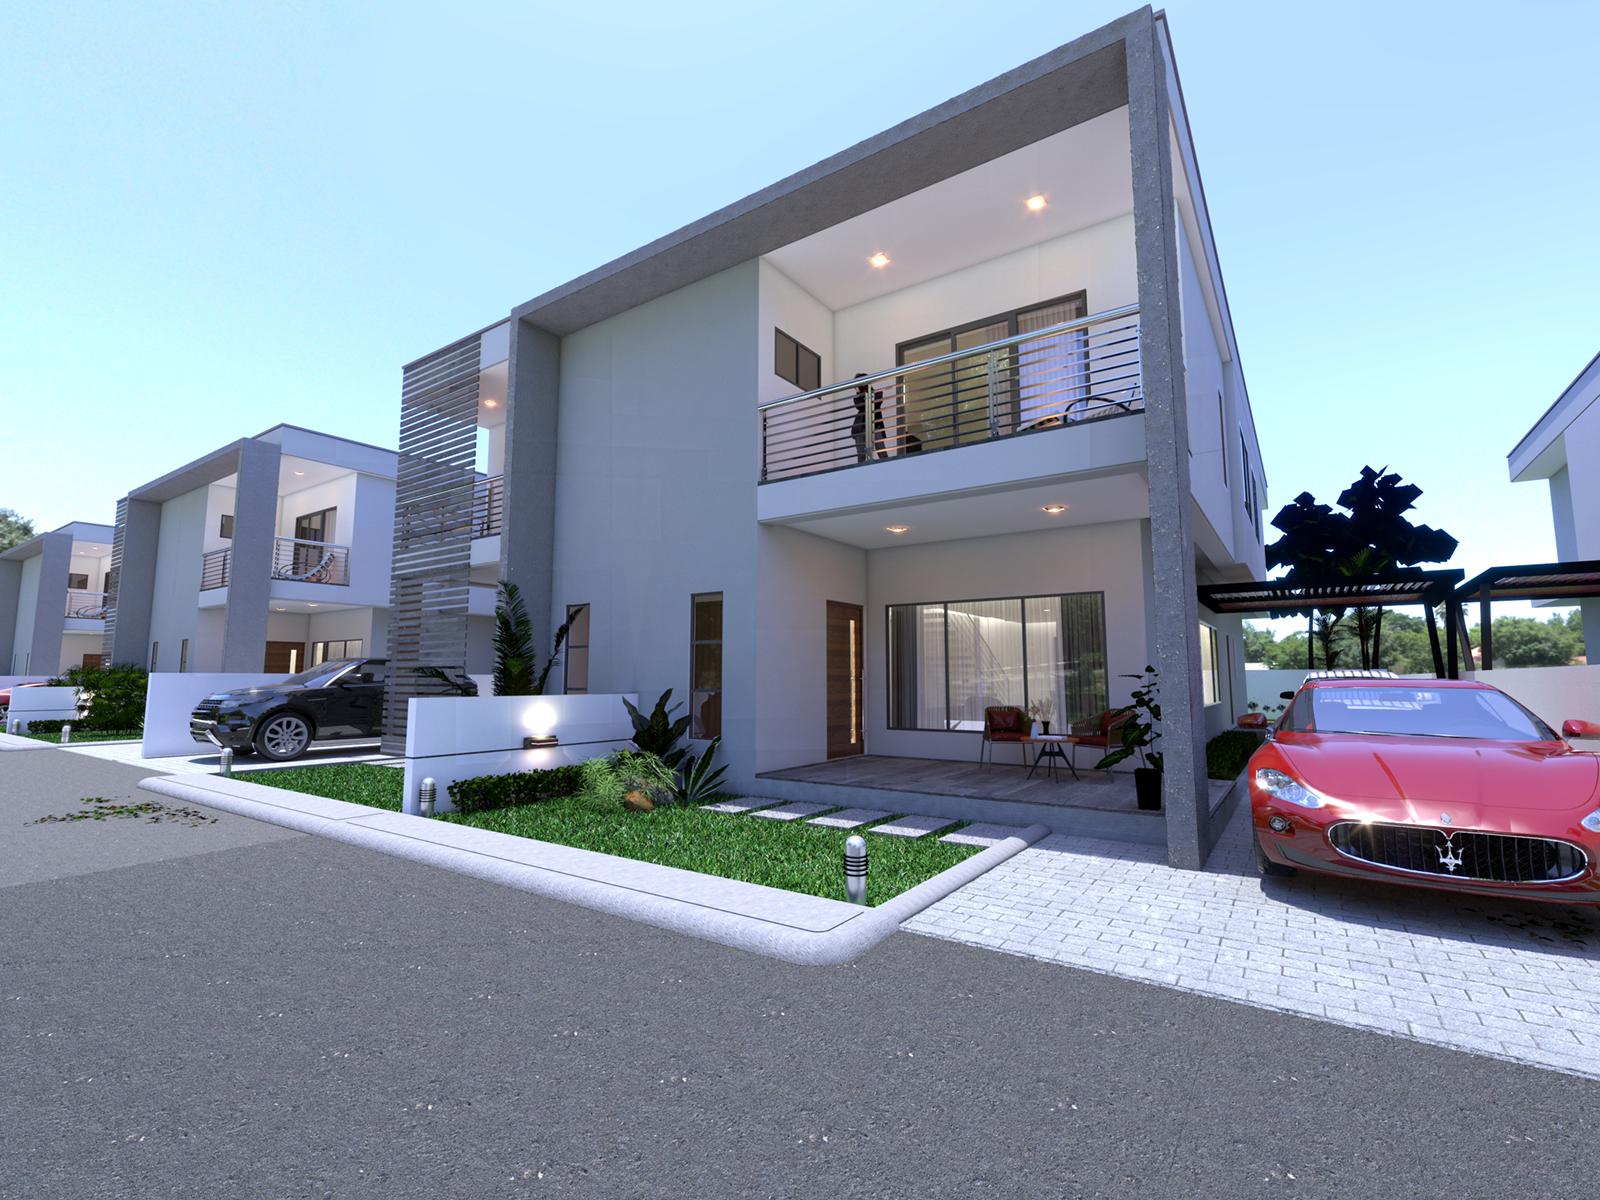 3 BEDROOM TOWNHOUSE FOR SALE AT TSE-ADDO